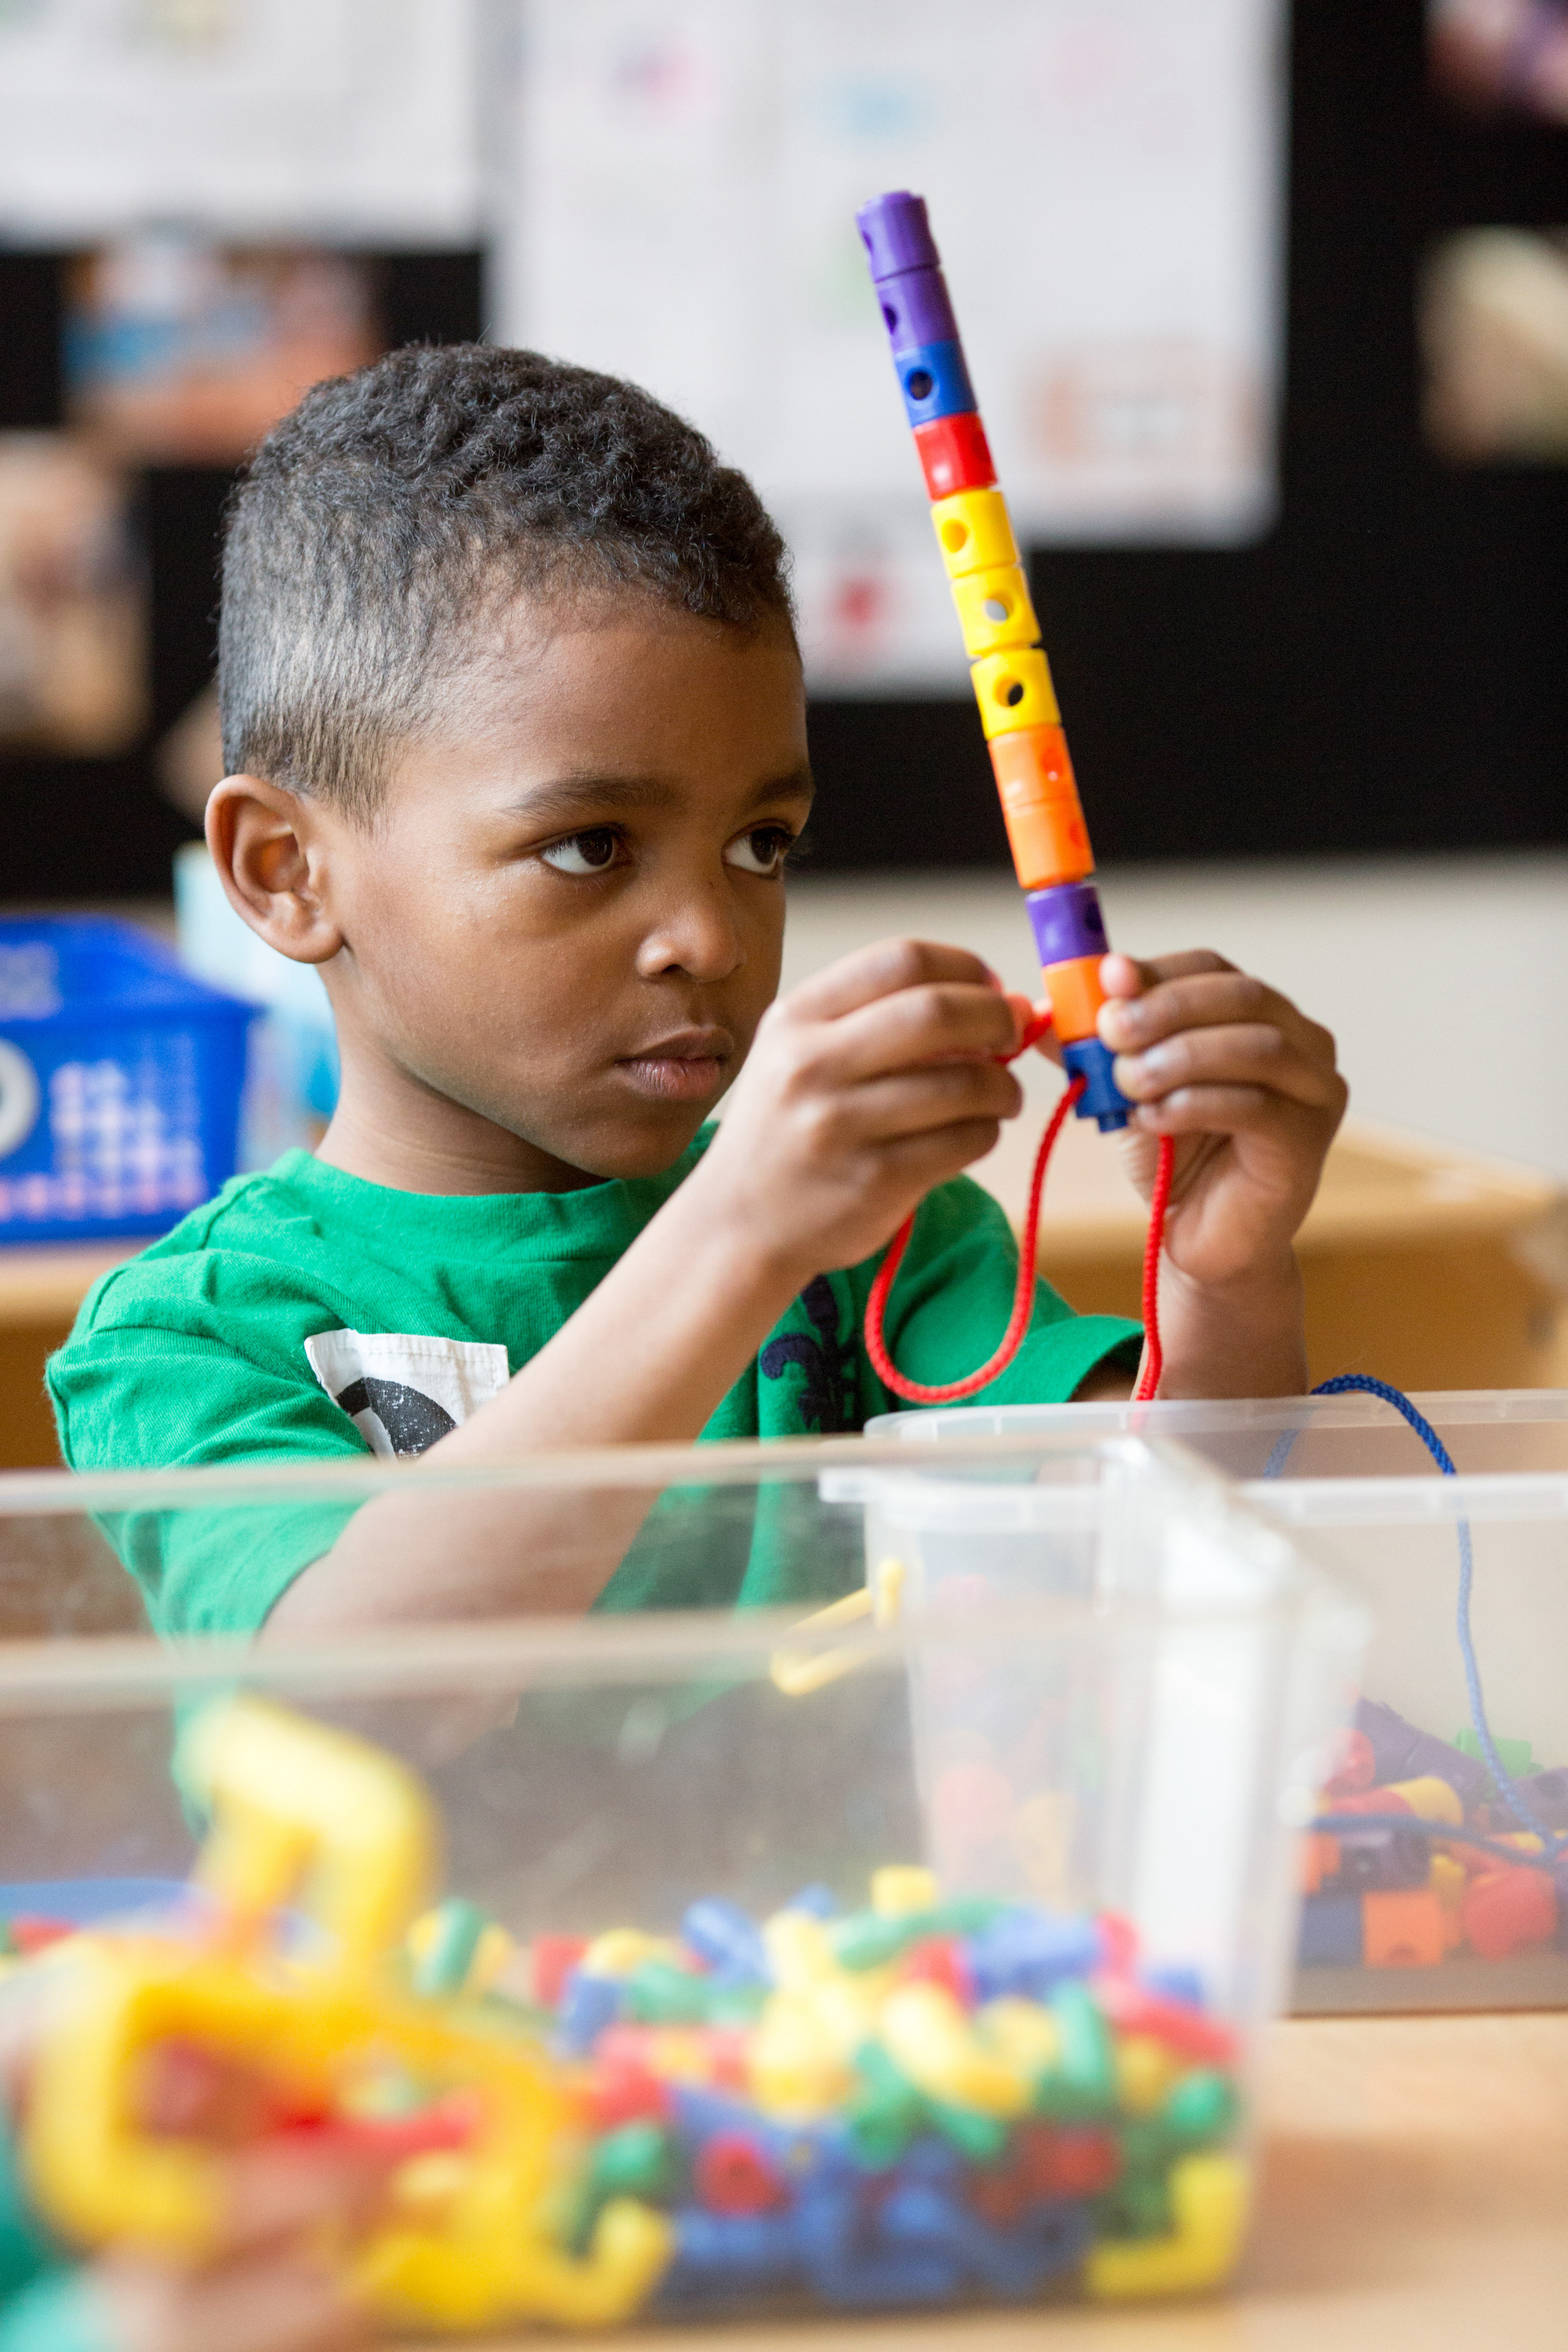 A preschool student threads plastic beads on a string.